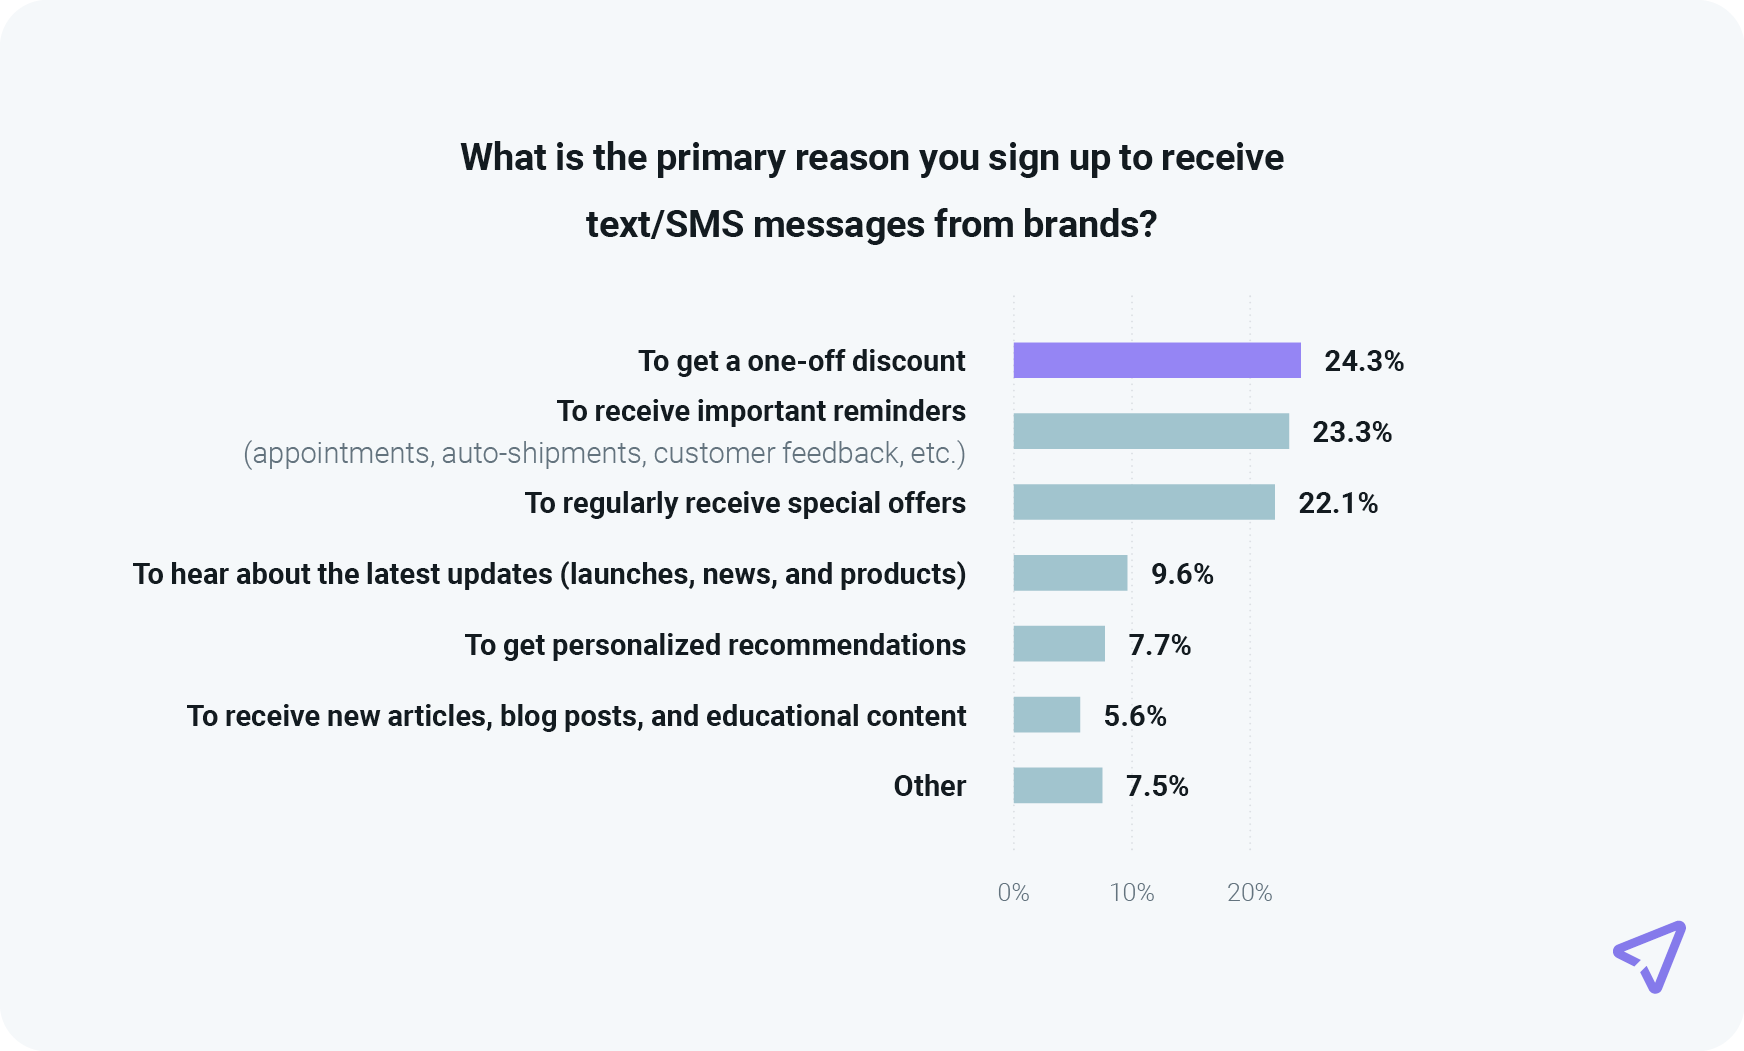 Chart shows reasons why consumers sign up for SMS promotions